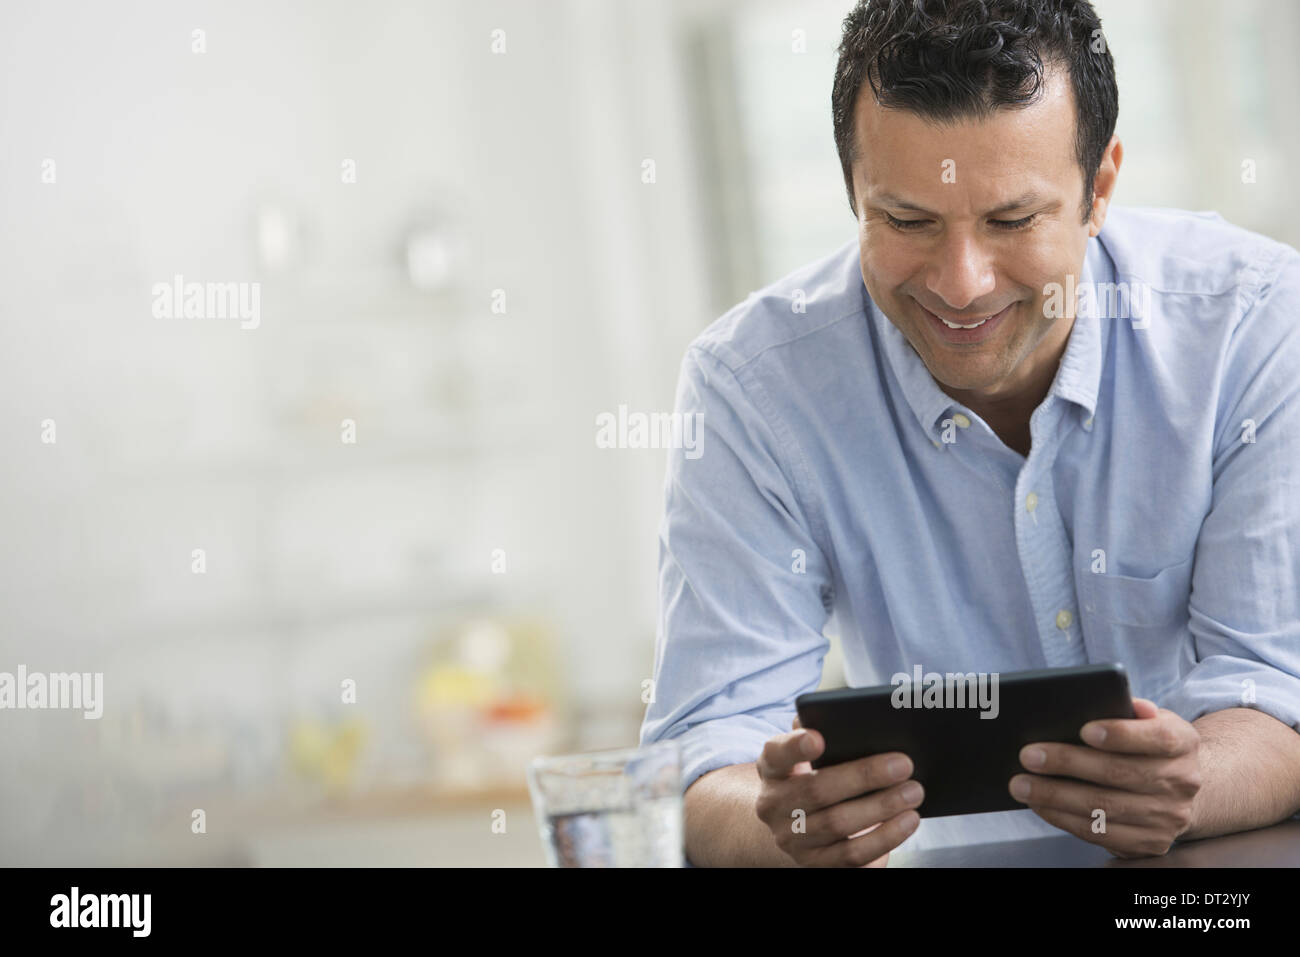 A man in a blue shirt leaning on a desk holding a digital tablet Stock Photo